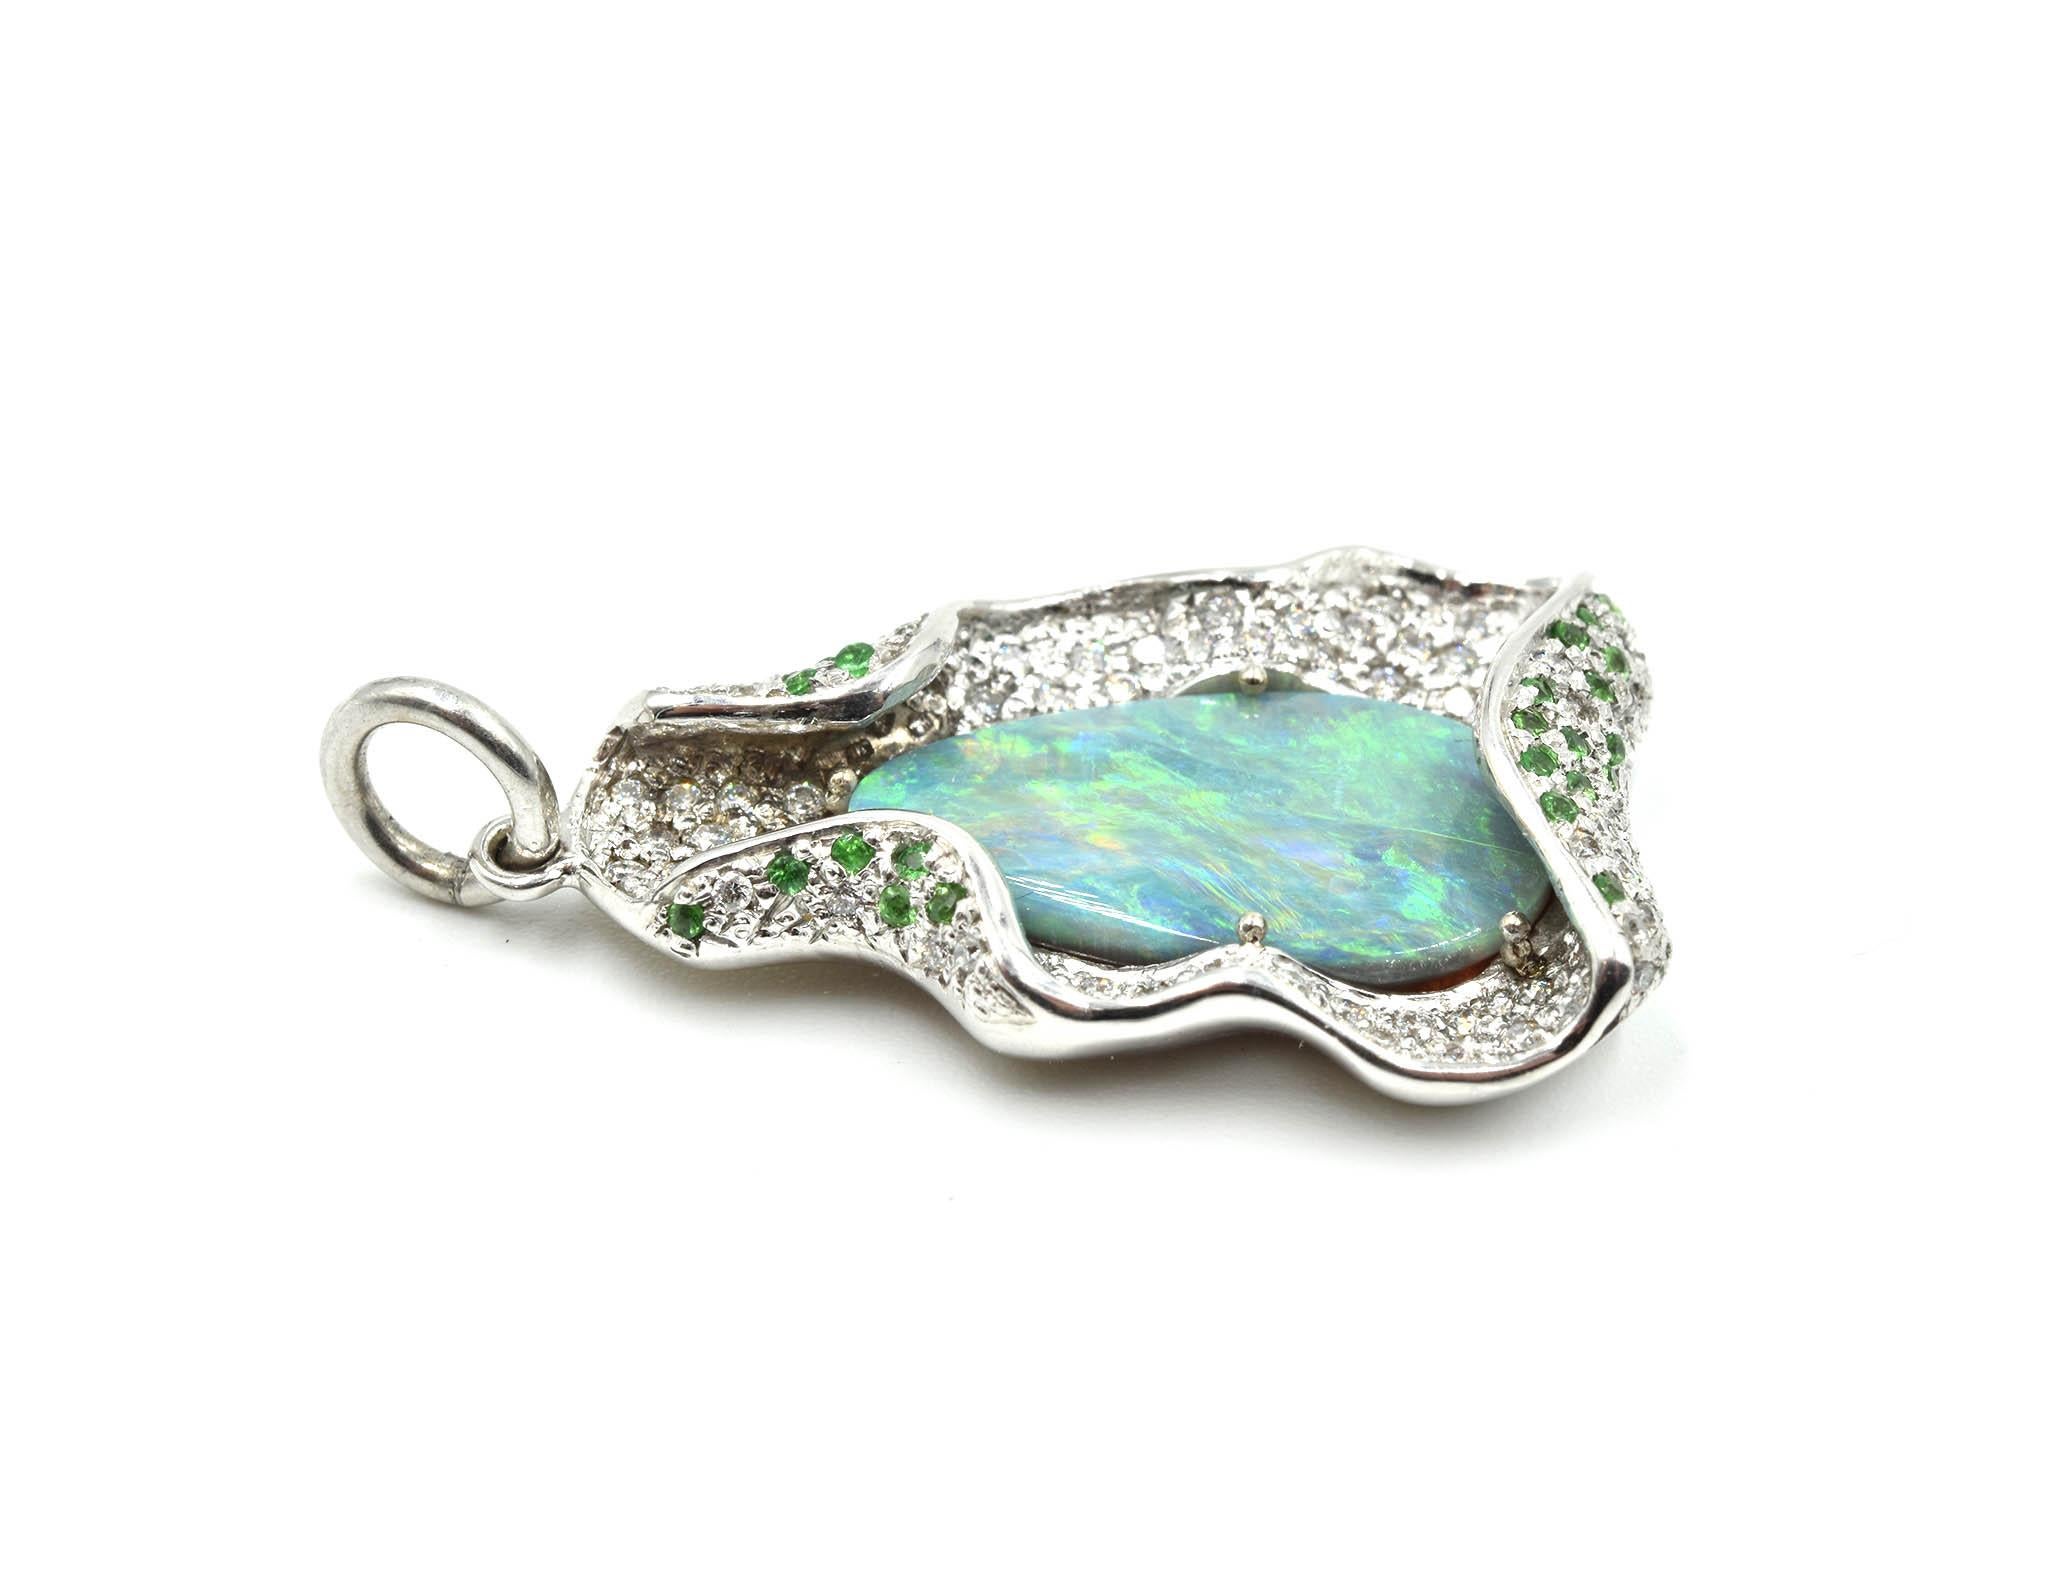 This 14k white gold custom-made pendant features a rare lightning ridge opal. The opal is prong set in the immense play-of-color. There are 0.18cttw of tsavorites and 0.90cttw of diamonds. The lightning ridge opal measures 18.52mmx10.52mm. The